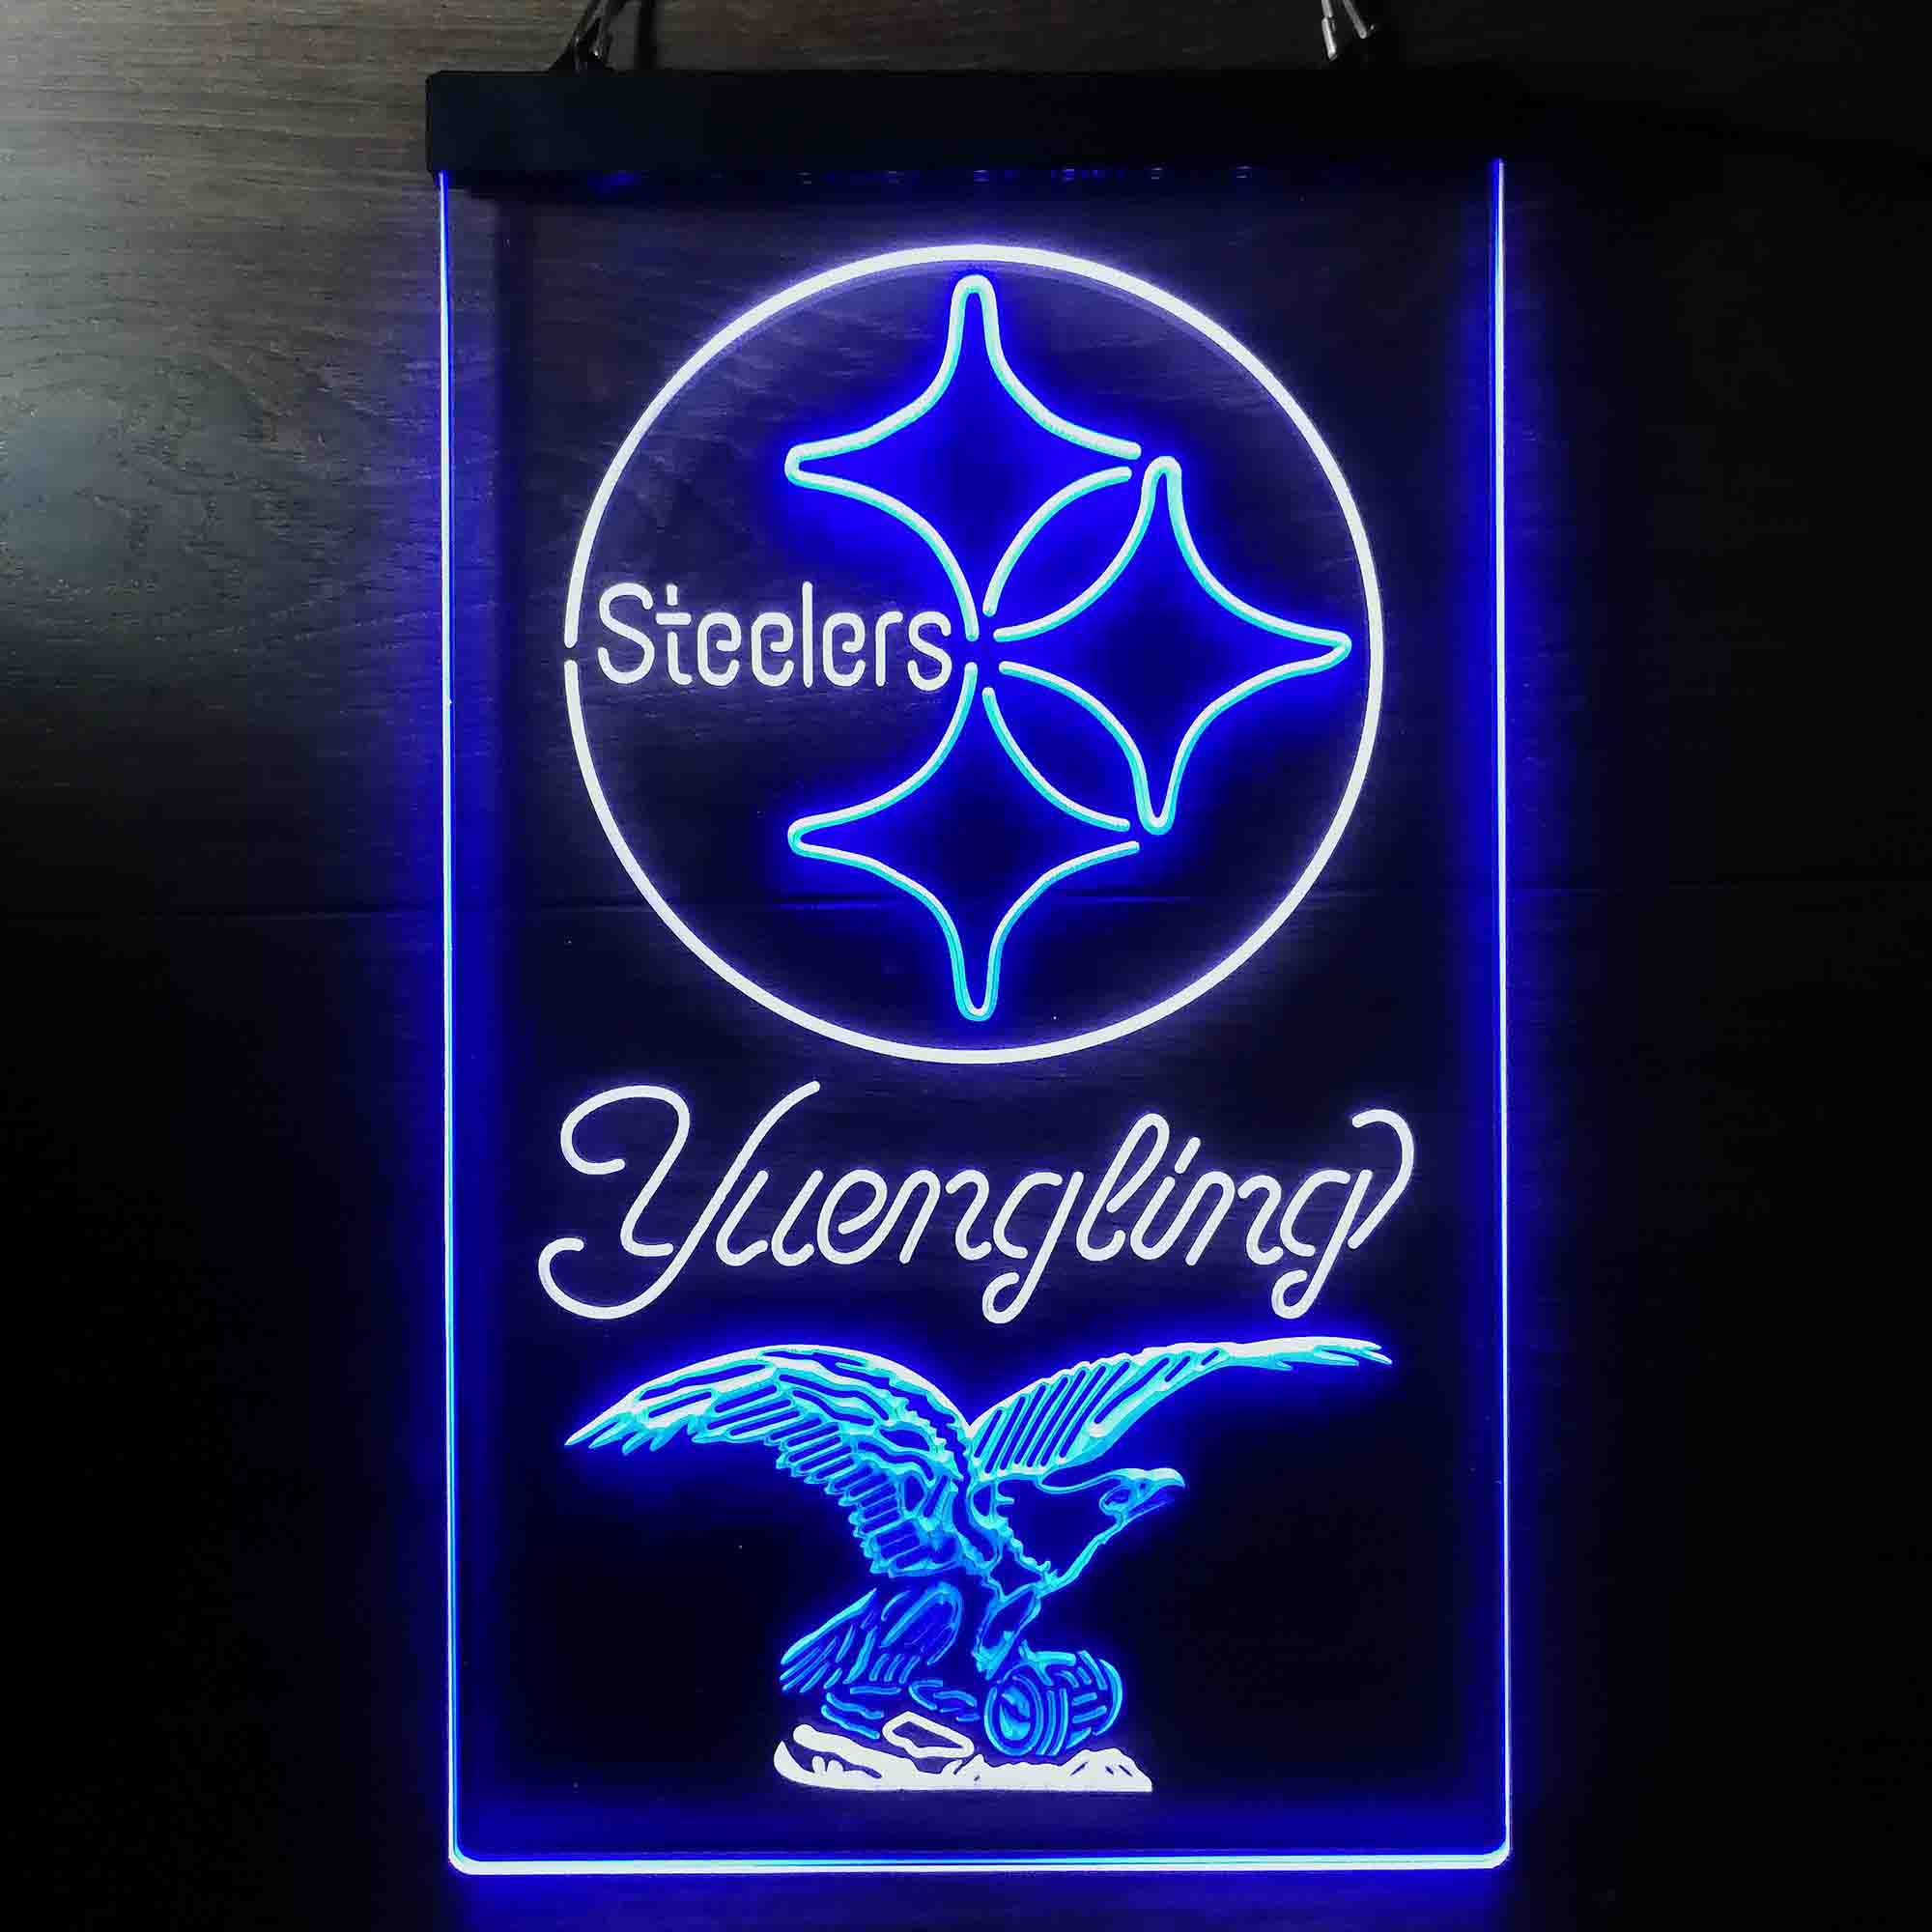 Yuengling Bar Pittsburgh Steelers Est. 1933 Neon-Like LED Sign